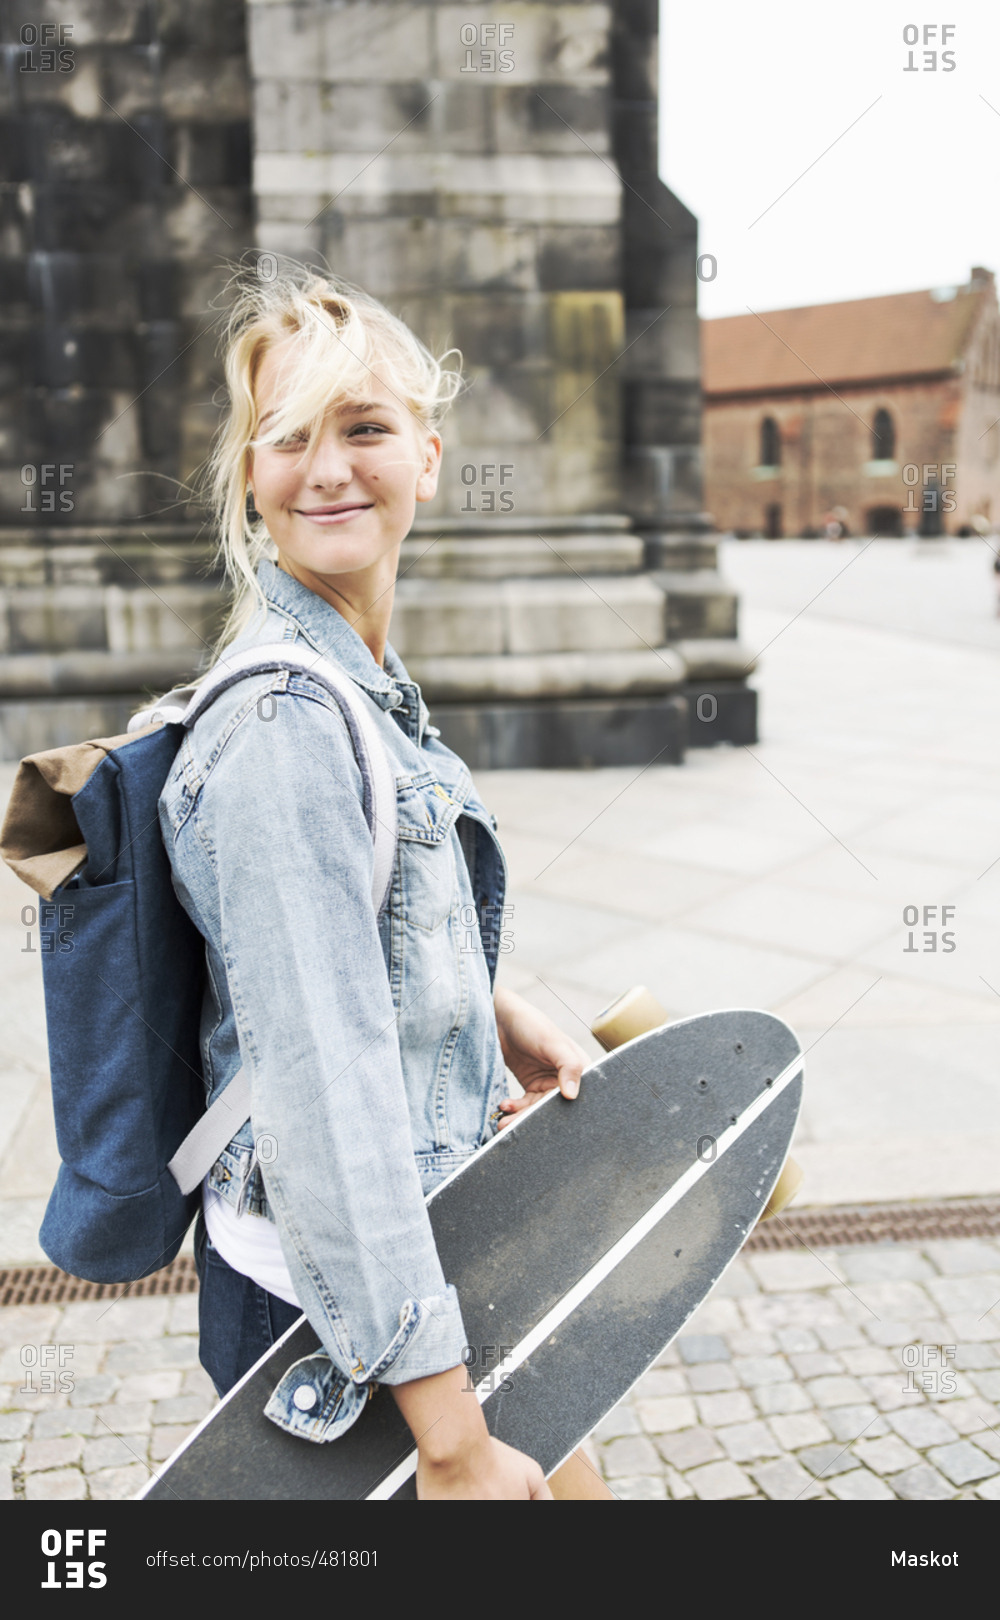 Smiling teenage girl holding skateboard while walking on cobbled street in city